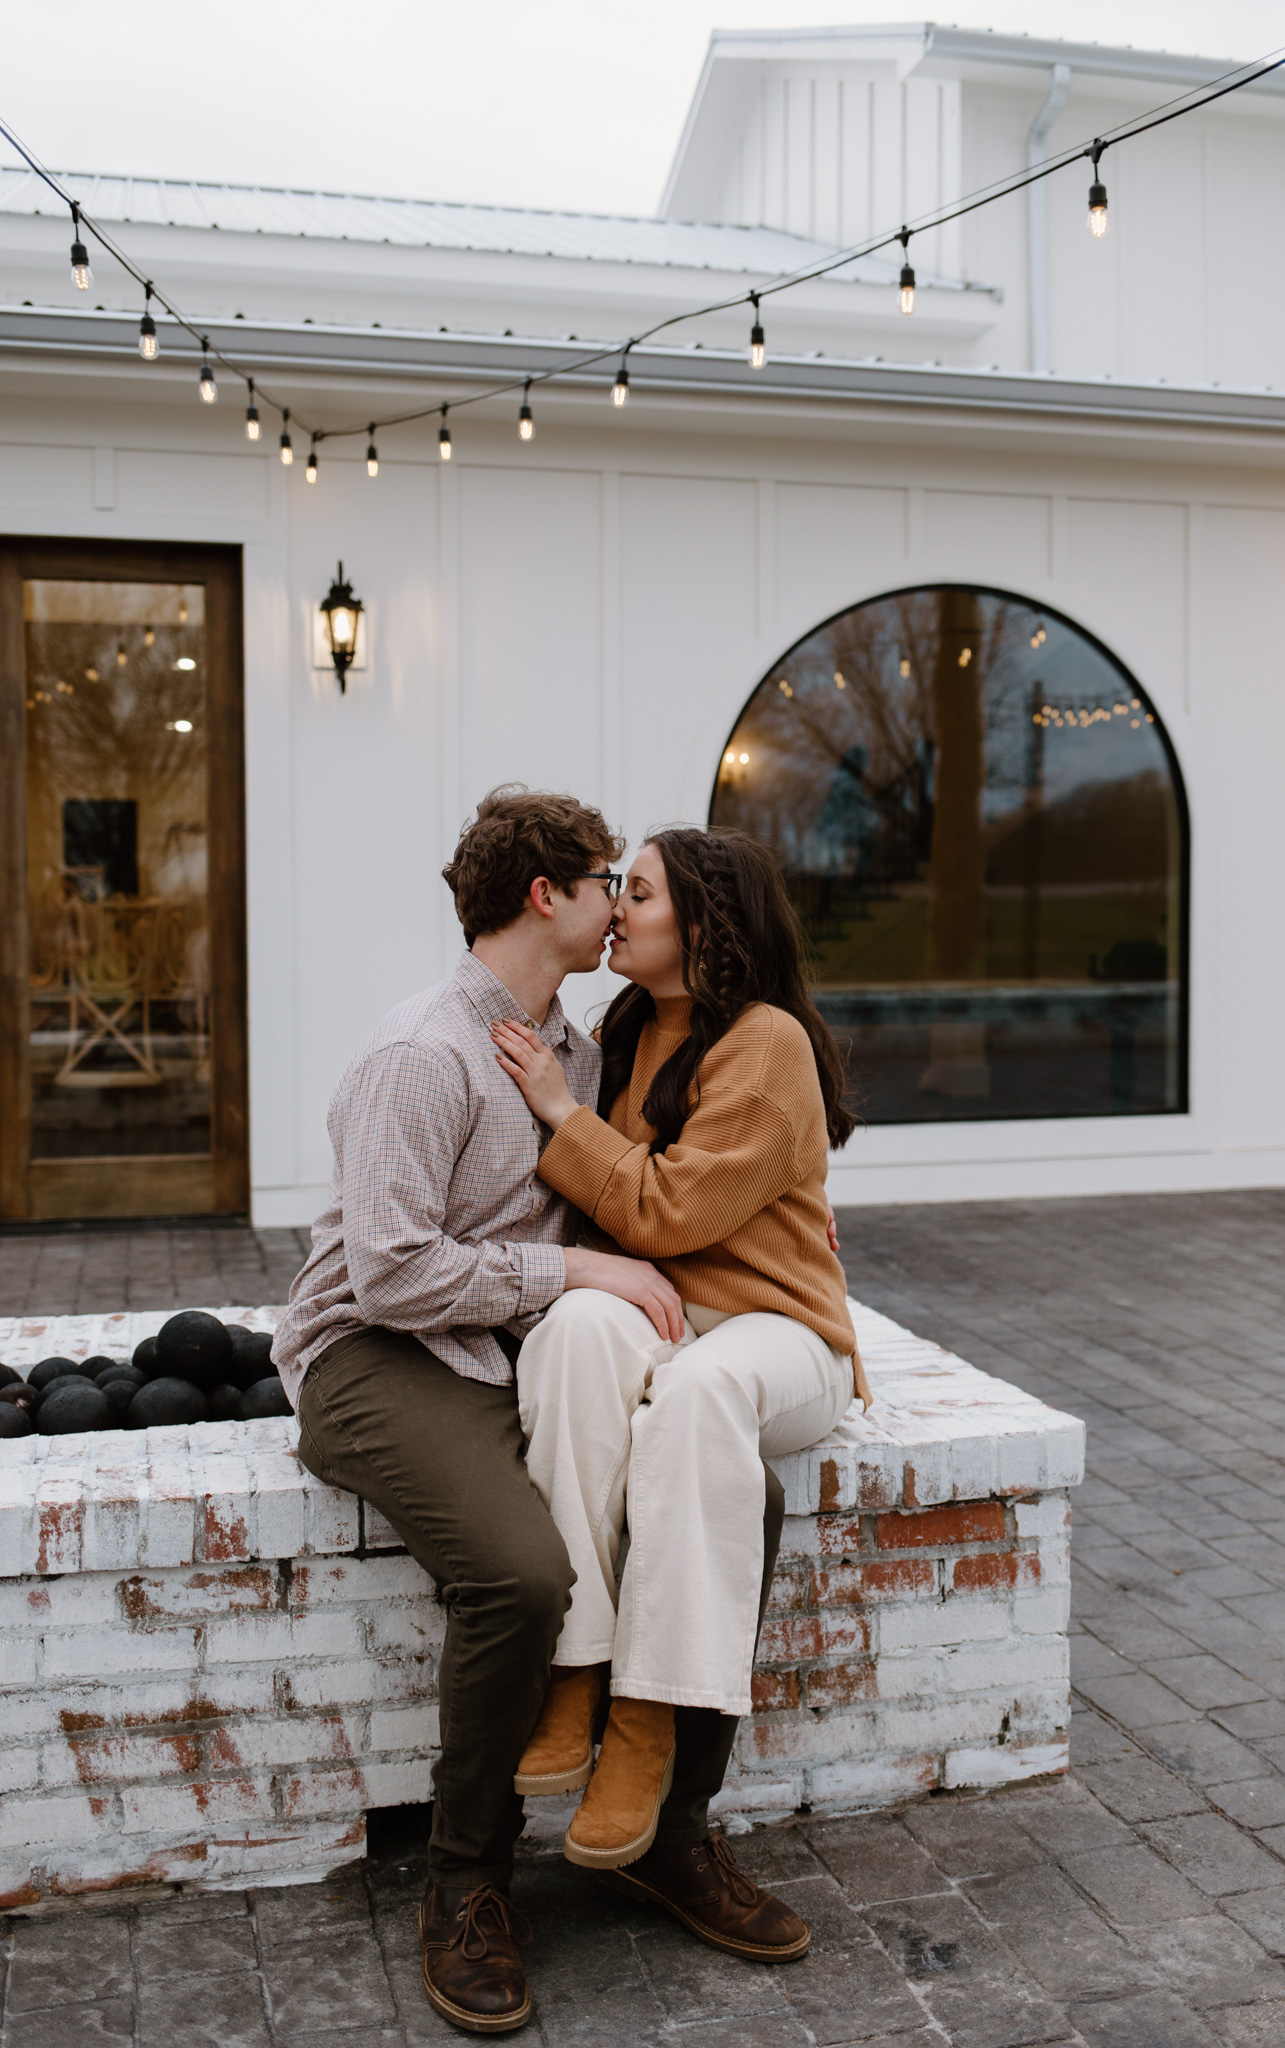 Neutral engagement session outfit ideas.